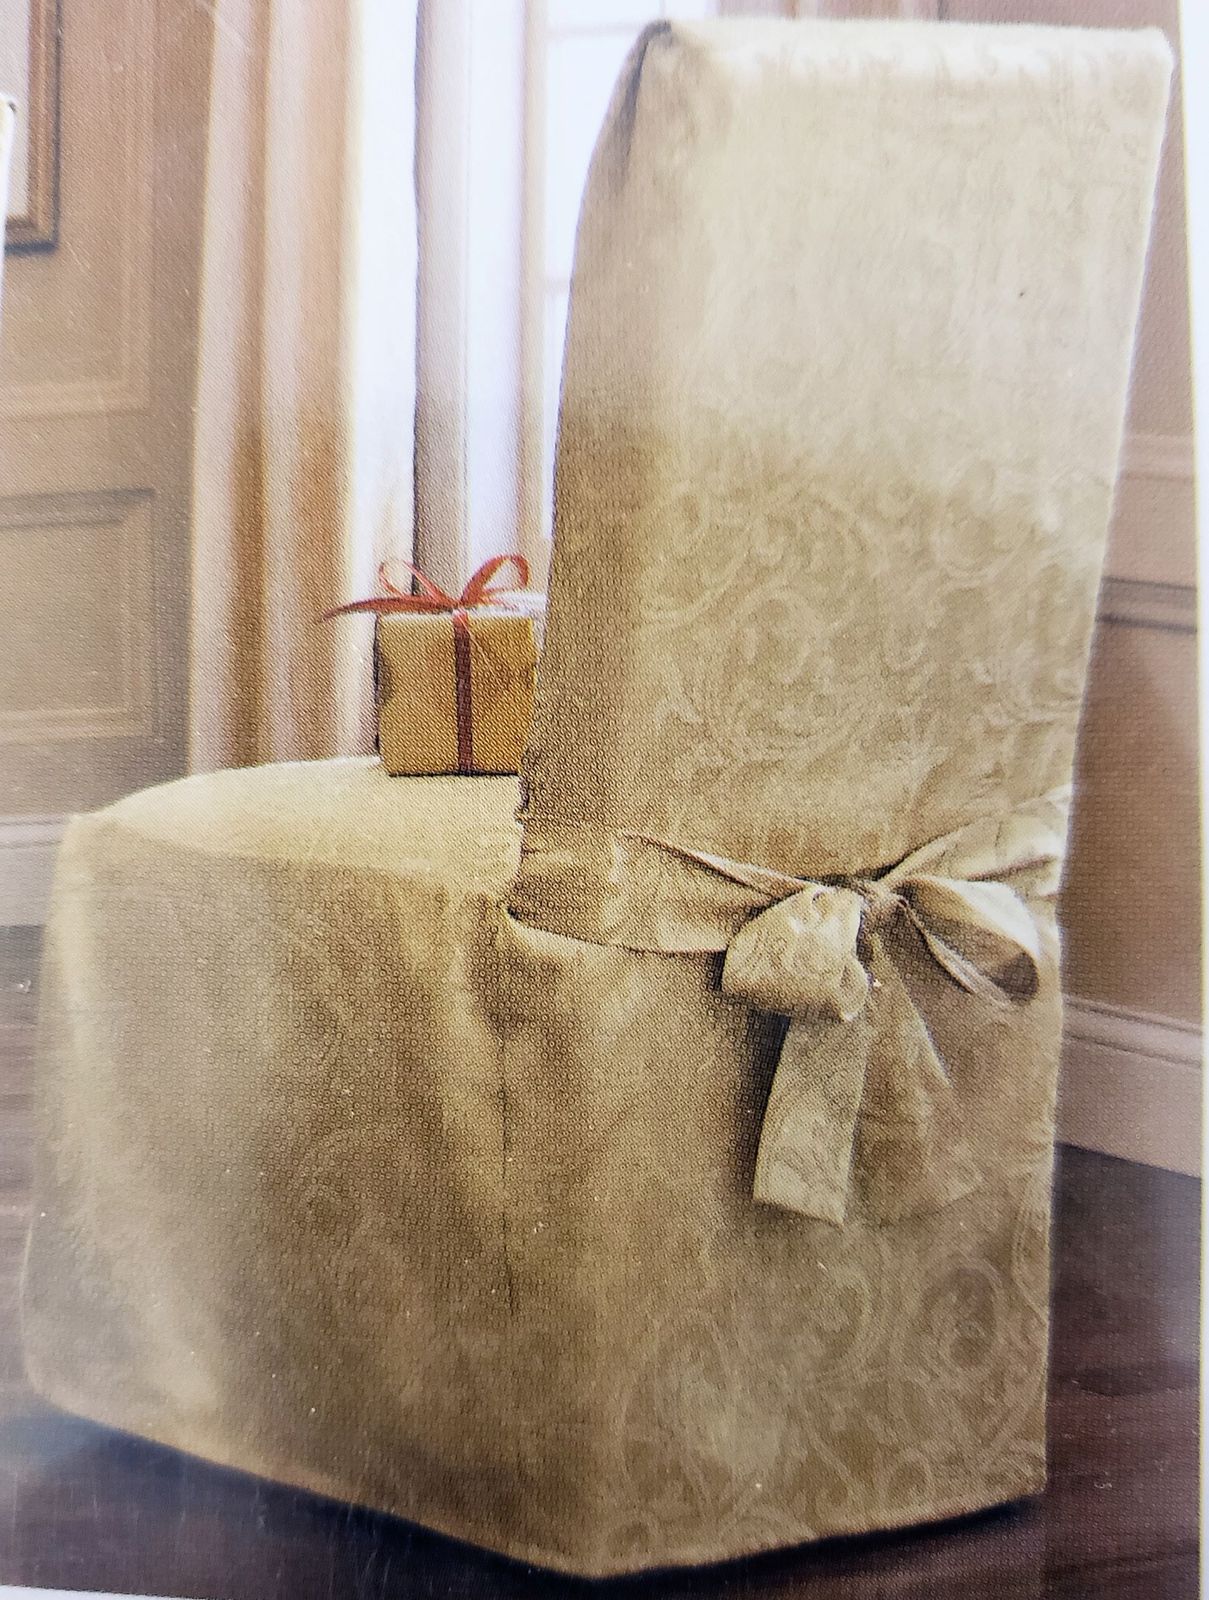 Gold Armless Dining Room Chair Cover - Fits Chairs Up To 42" Tall - $44.99